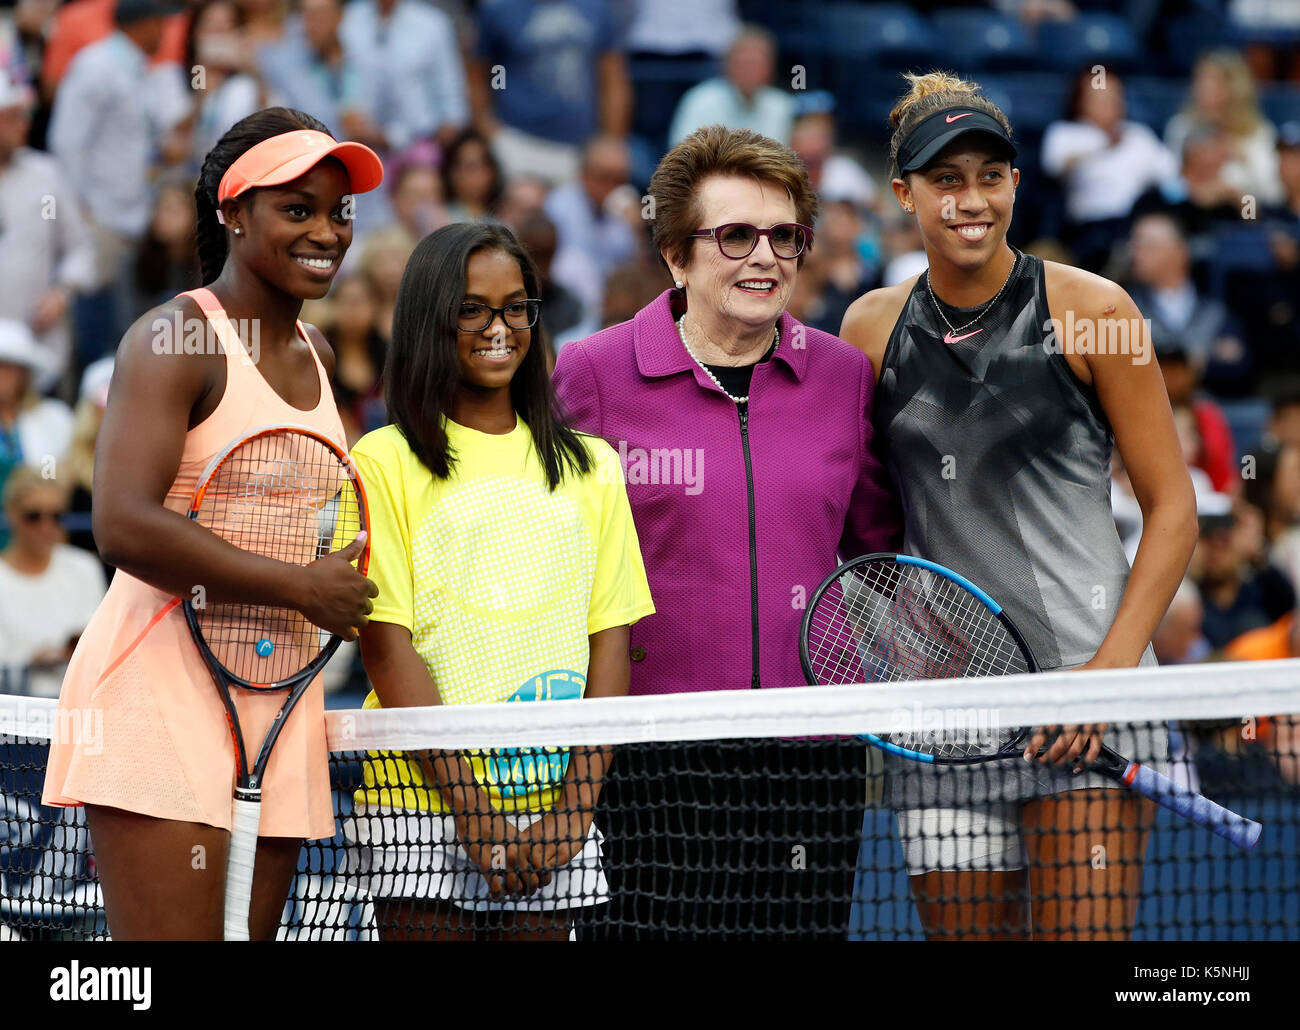 New York, USA. 9th Sep, 2017. Billie Jean King (2nd R) poses for photos with Sloane Stephens (1st L) and Madison Keys (1st R) of the United States before the women's singles final match at the 2017 US Open in New York, the United States, Sept. 9, 2017. Sloane Stephens won 2-0 to claim the title. Credit: Qin Lang/Xinhua/Alamy Live News Stock Photo